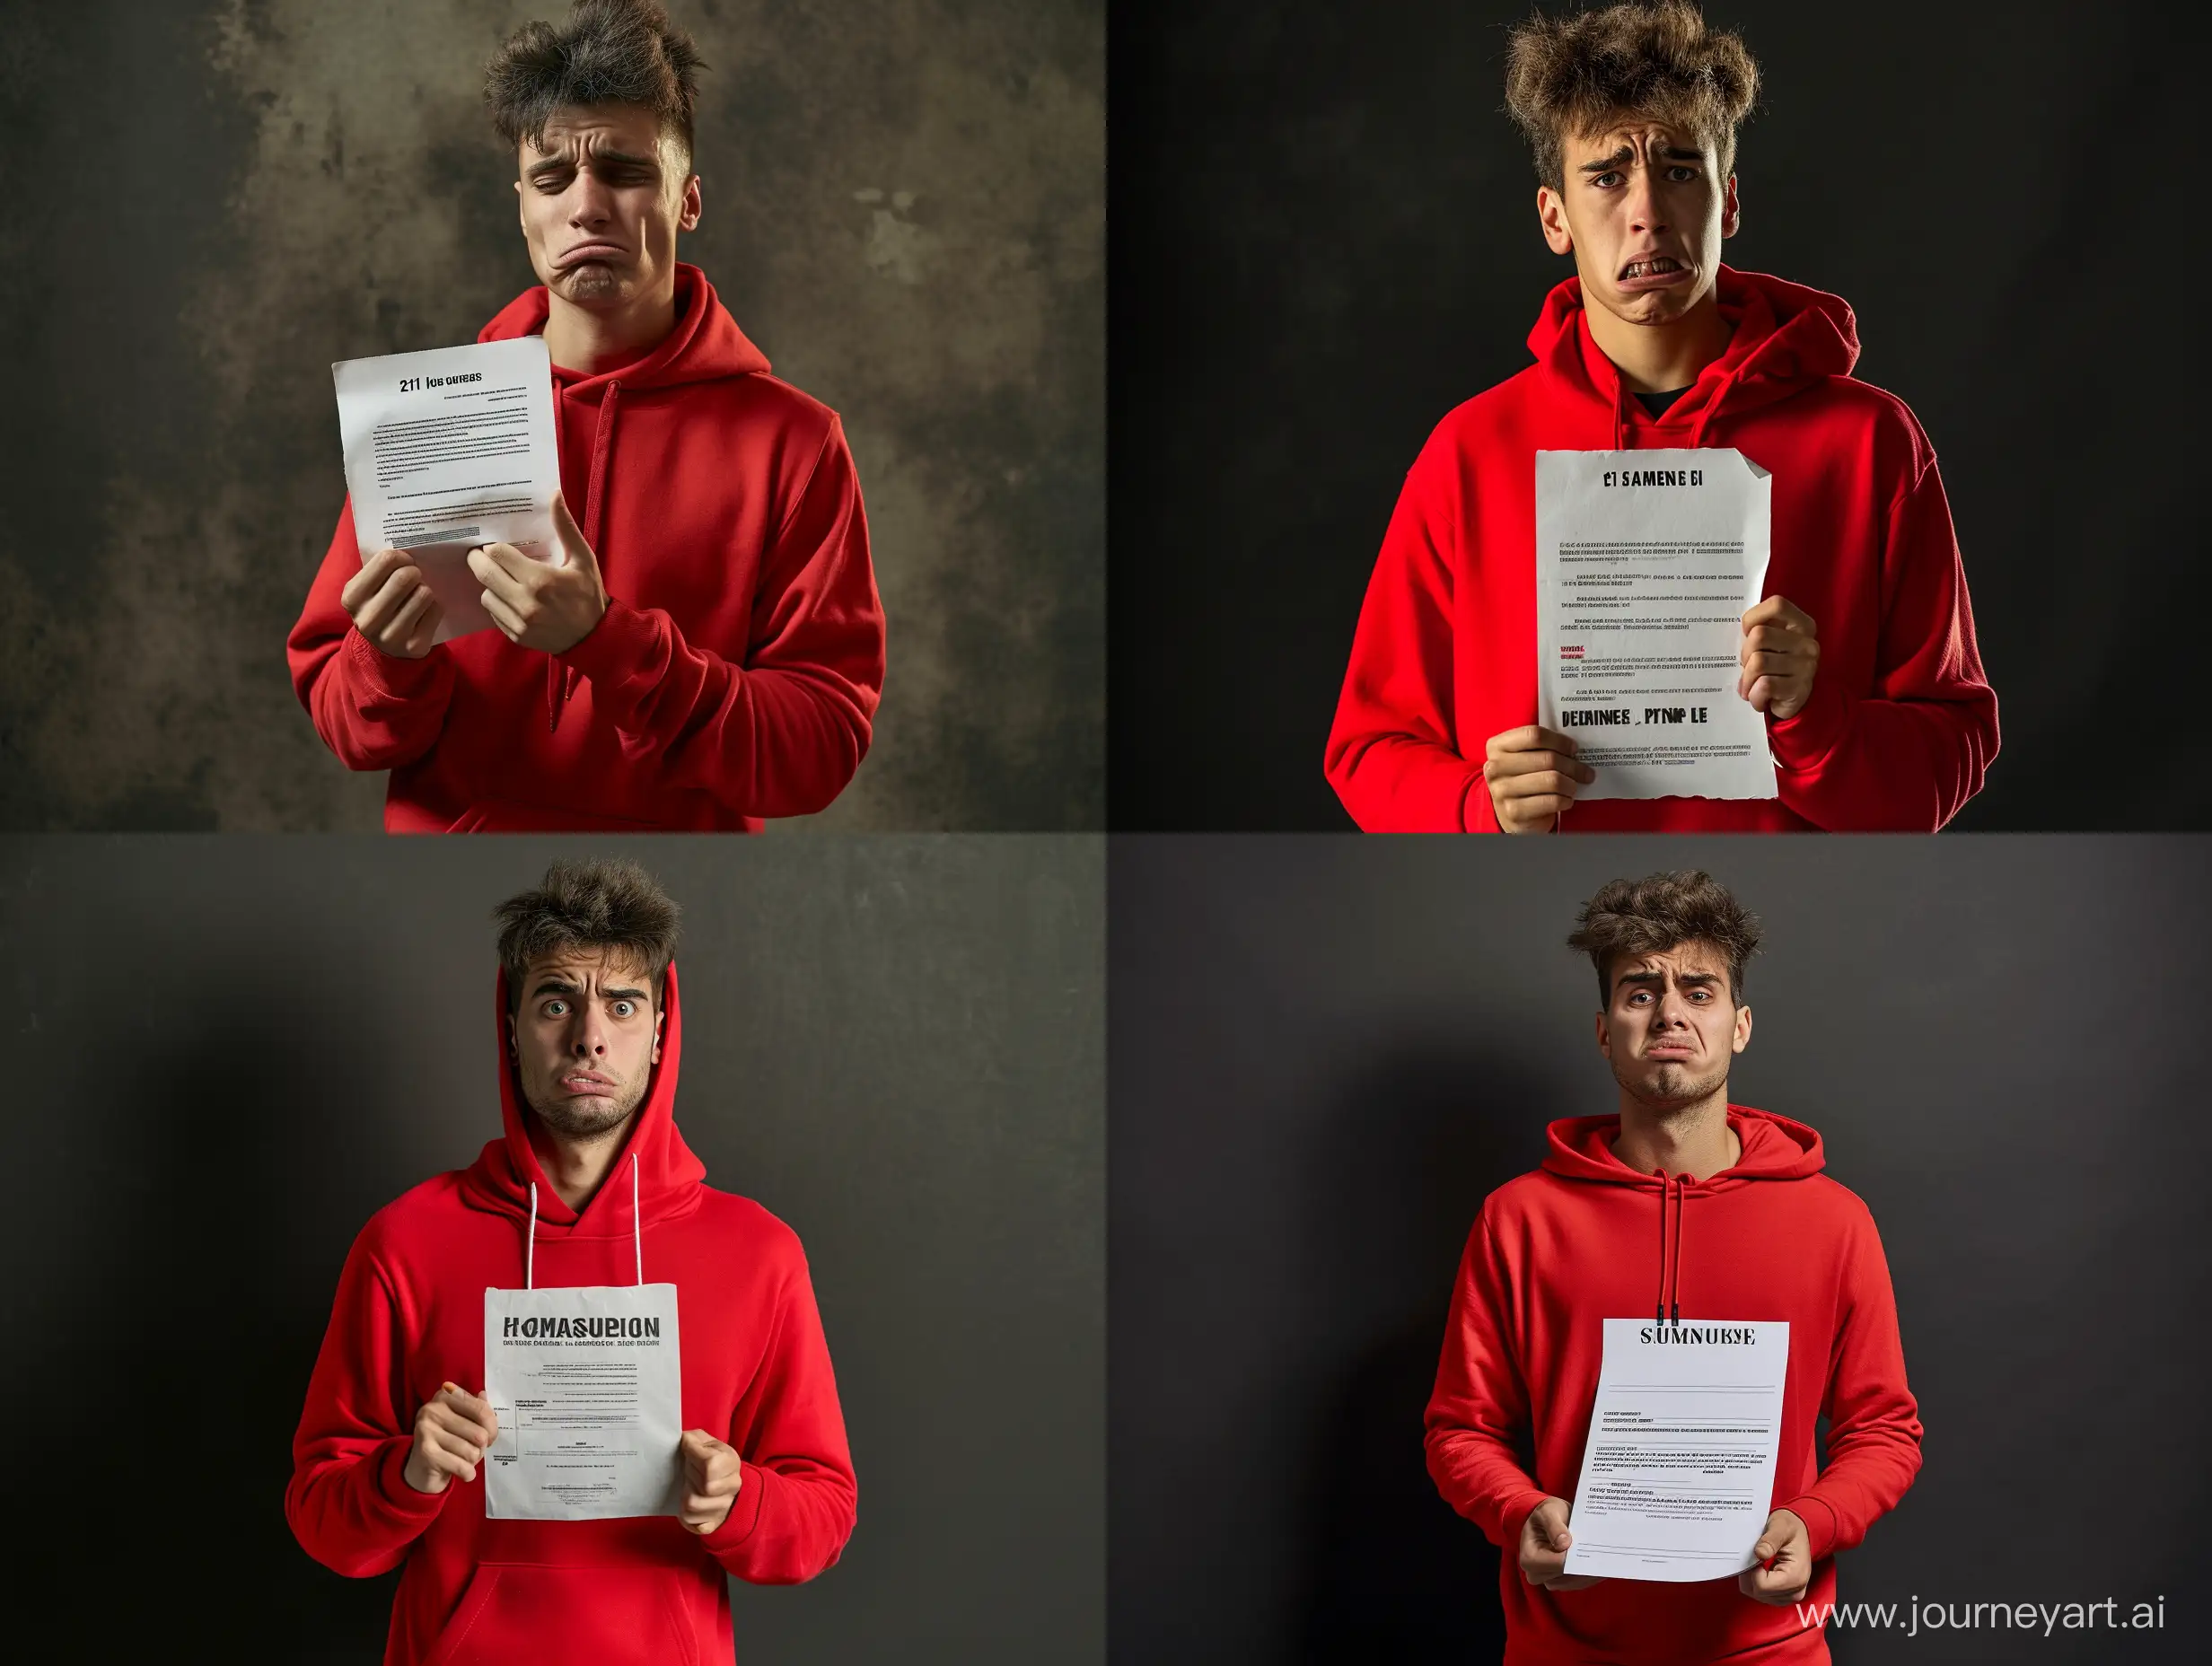 Upset guy, 21 years old. He learned that he had been declared fit for military service. He's upset about it. The guy is wearing a red hoodie and holding a piece of paper with a summons. Make the picture realistic and in high quality.